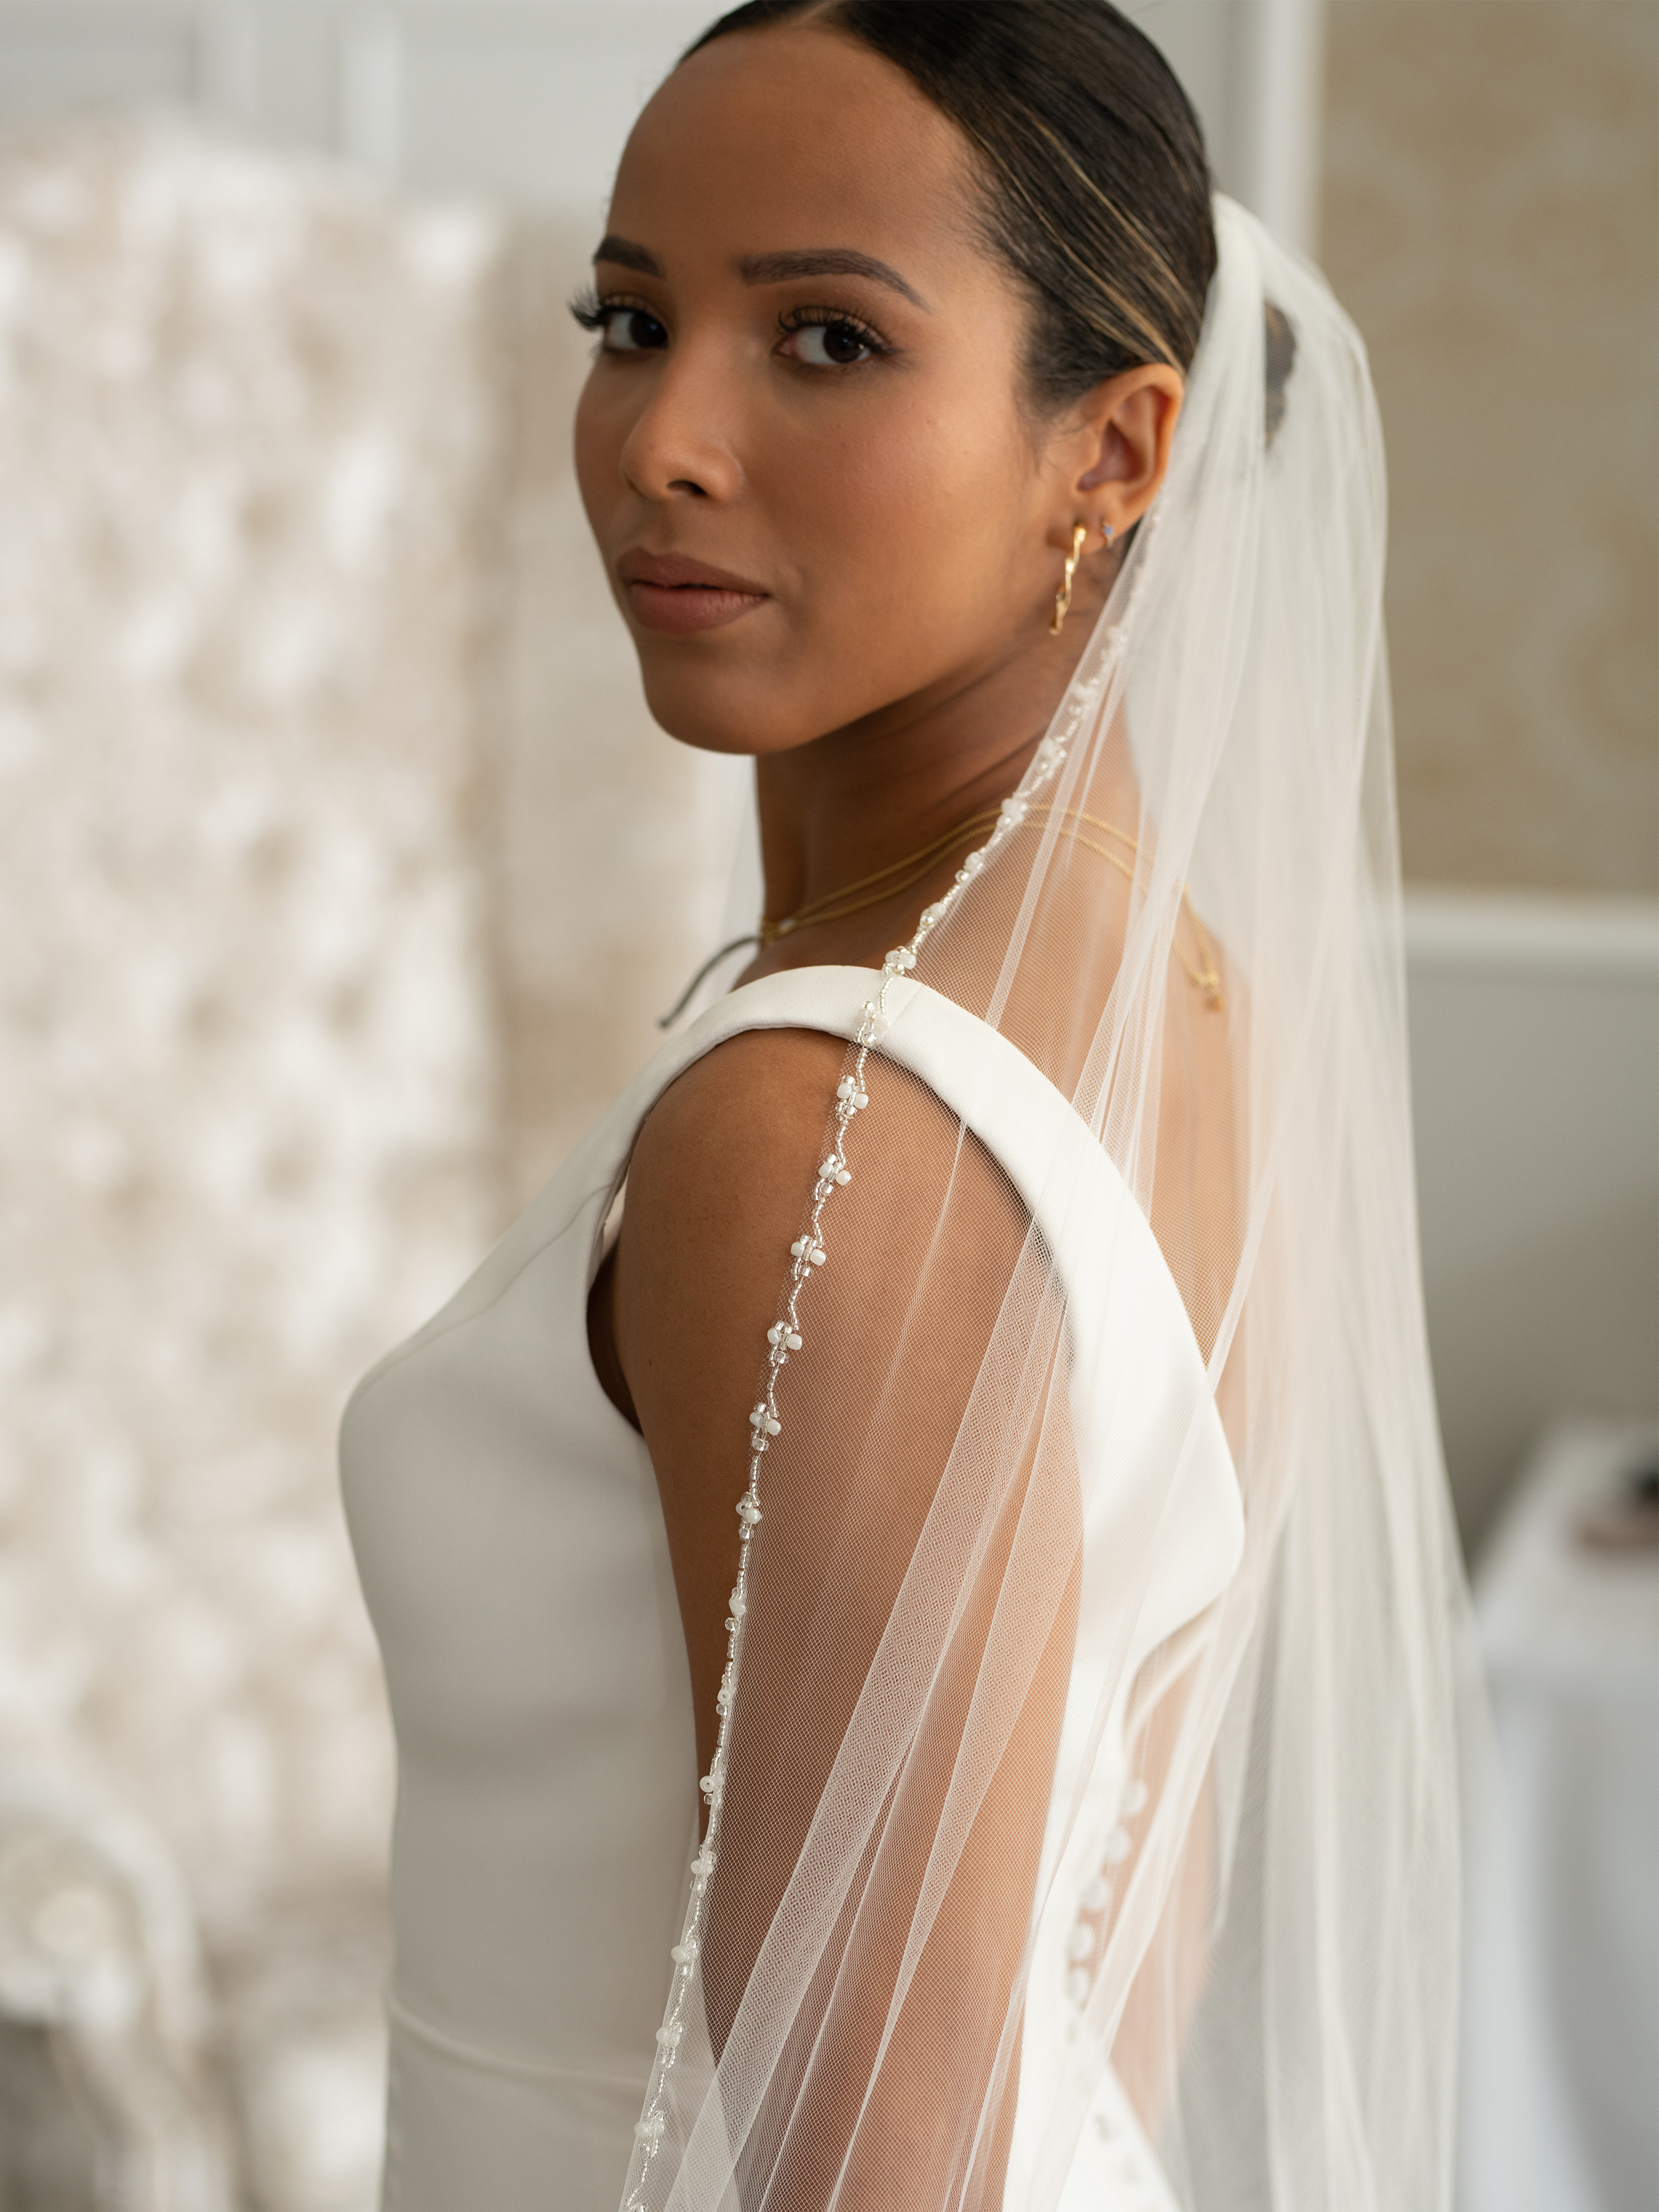 Pearl veils, Bridal veil with pearls